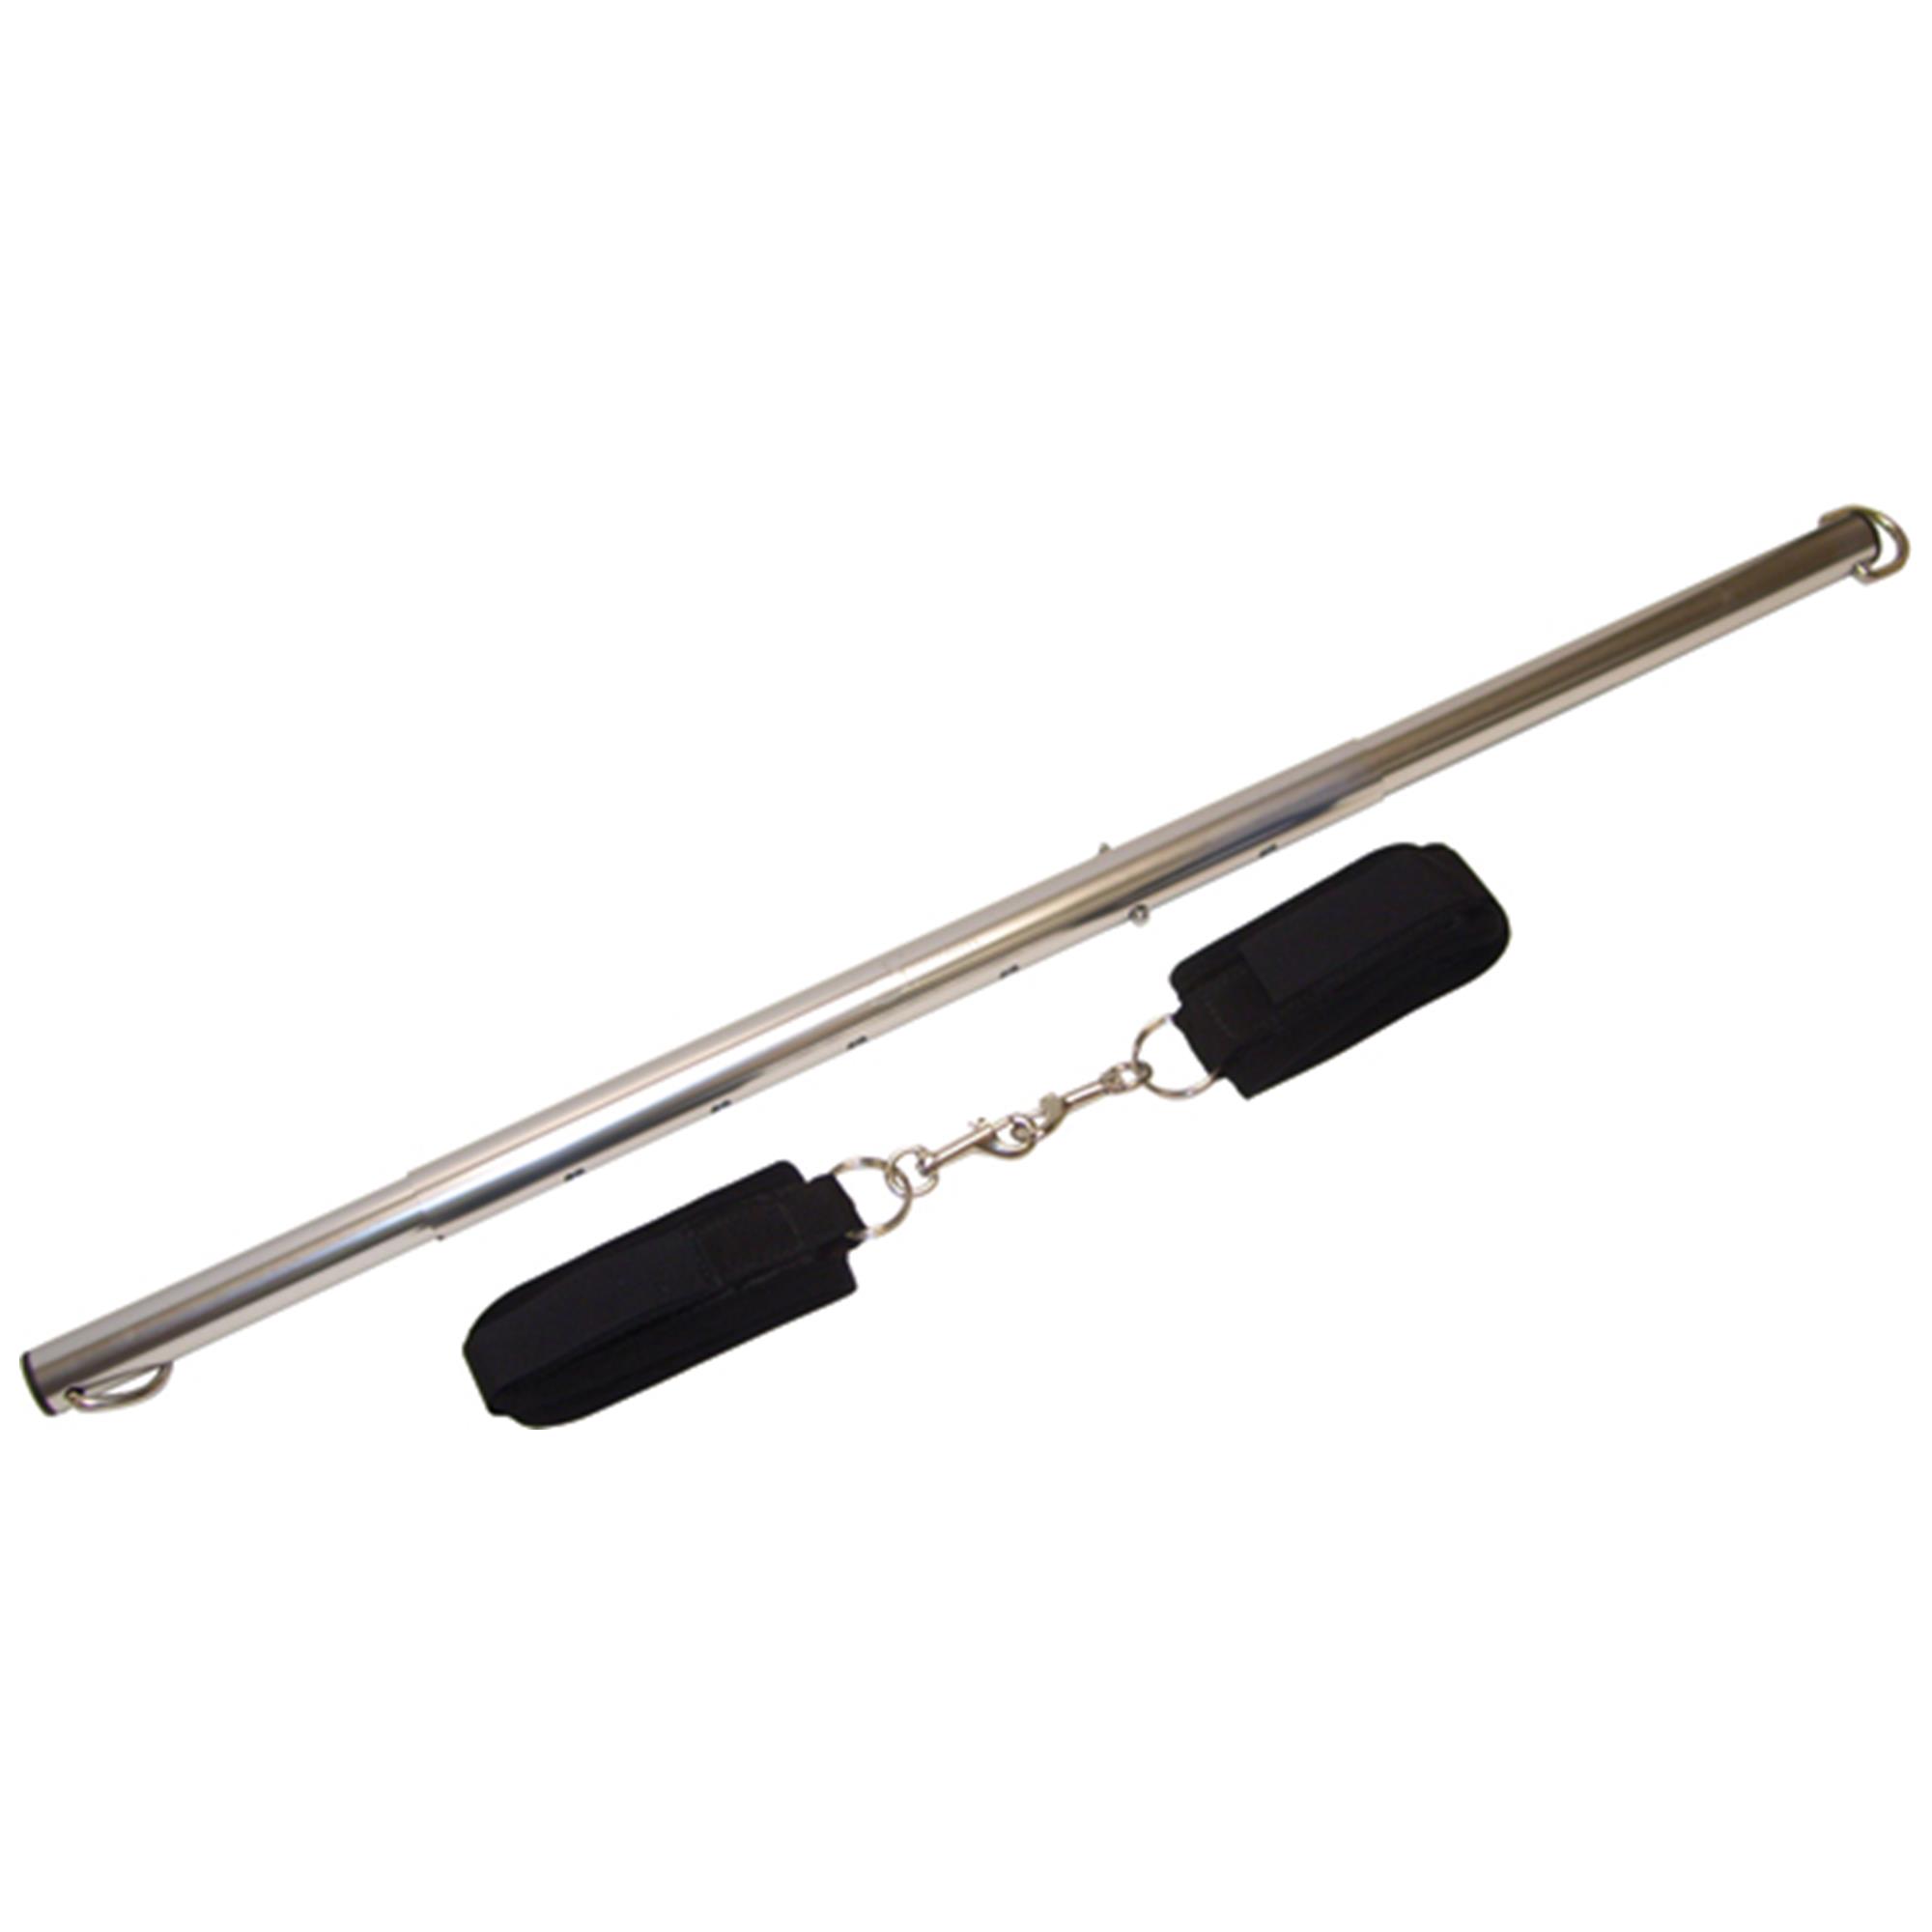 Sportsheets Expandable Spreader Bar & Cuffs